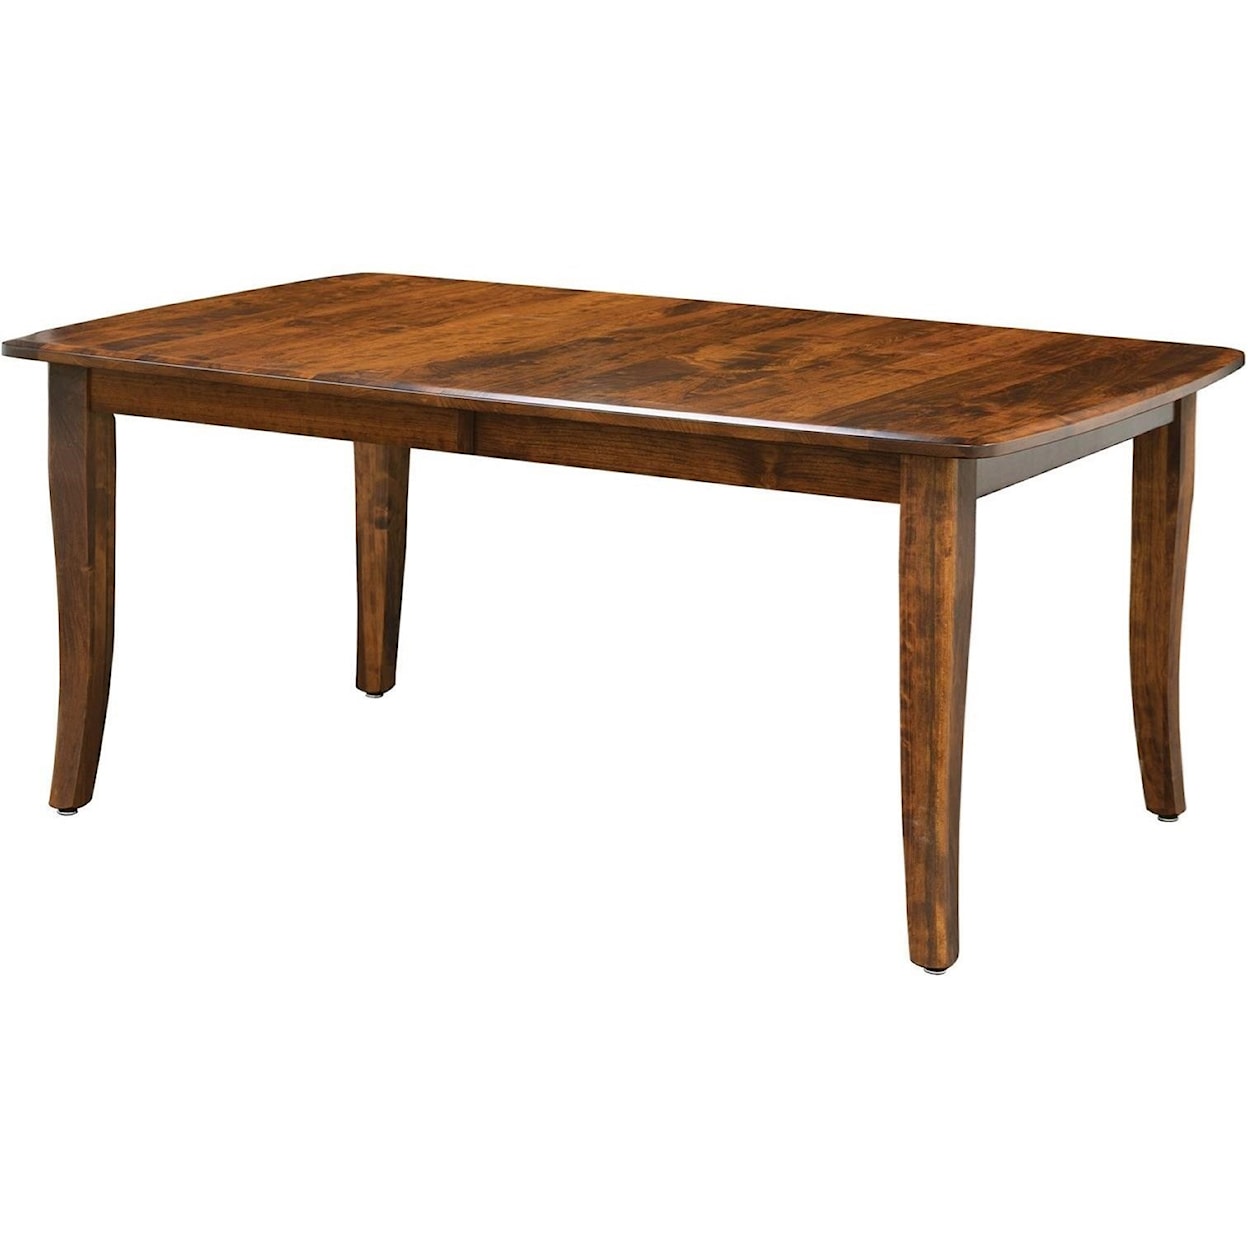 Trailway Wood Easton Pike 42" x 66" Dining Table